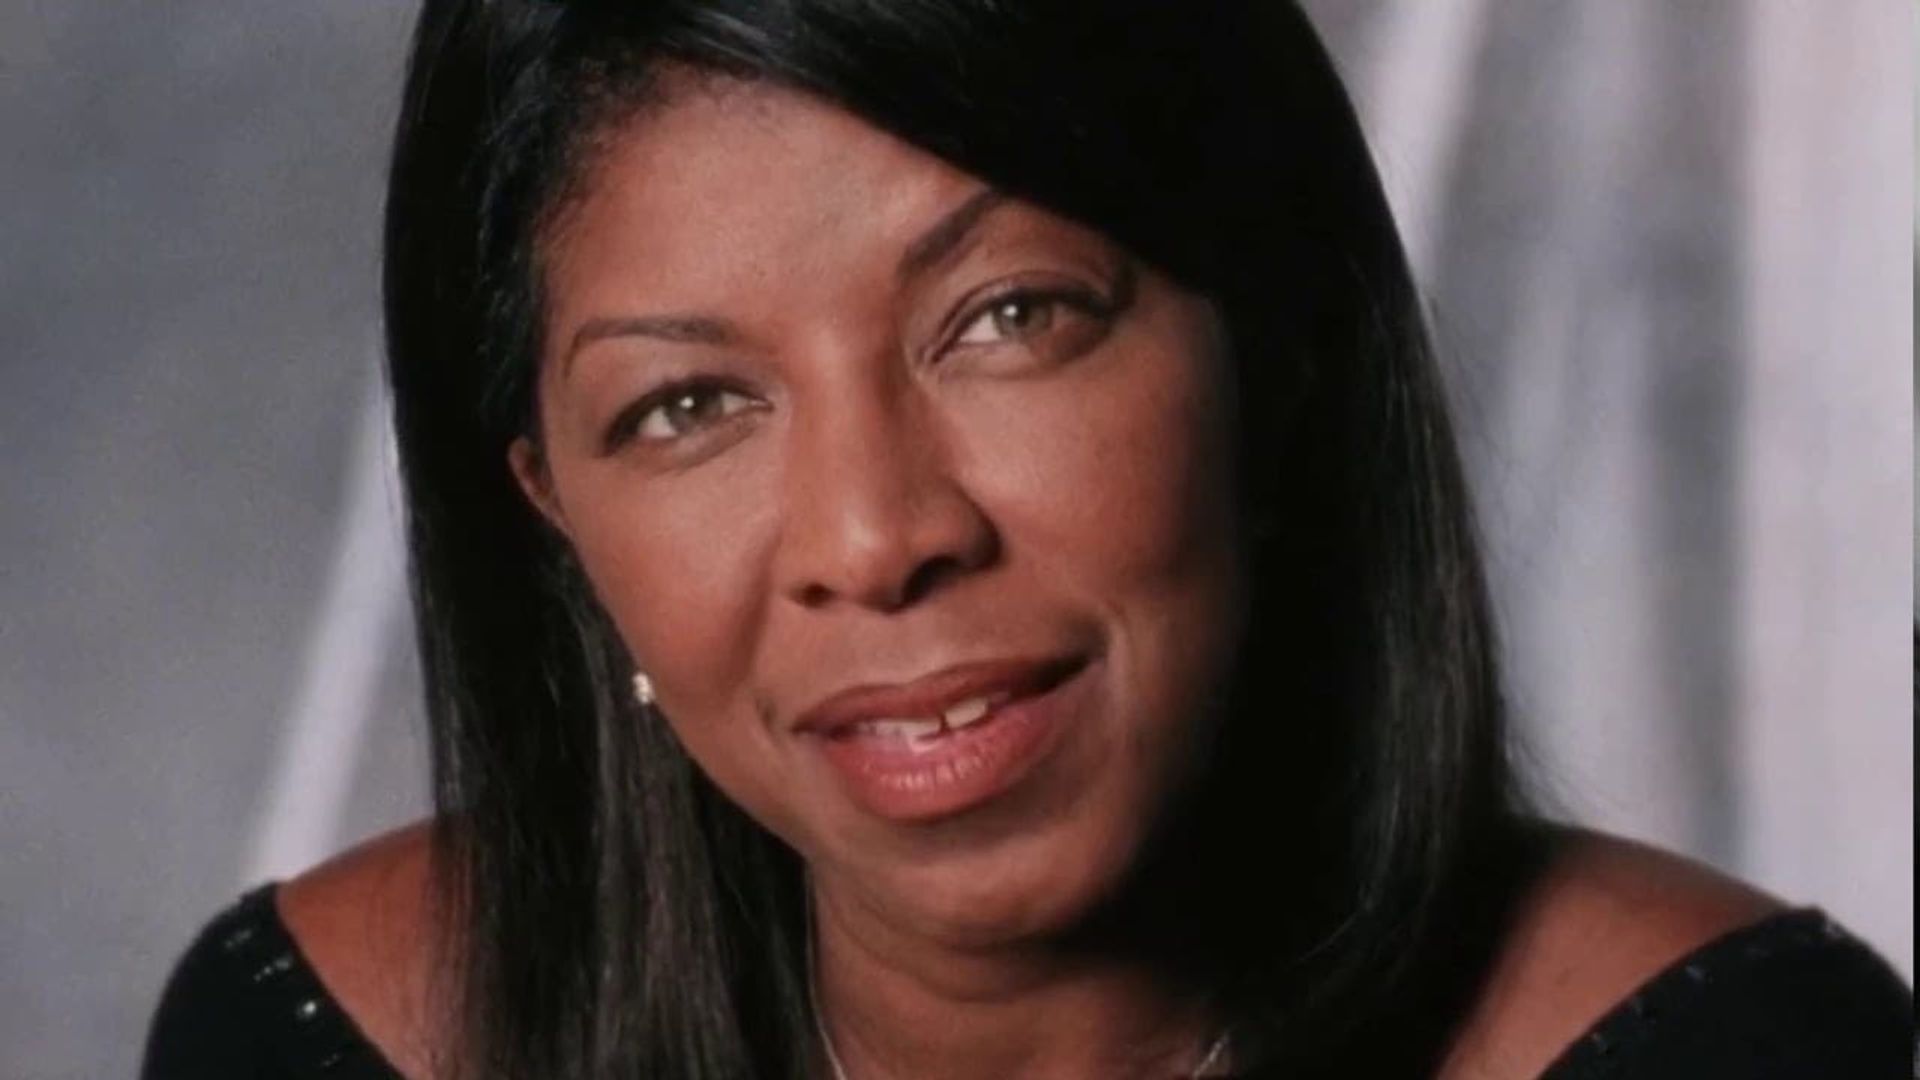 Livin' for Love: The Natalie Cole Story background